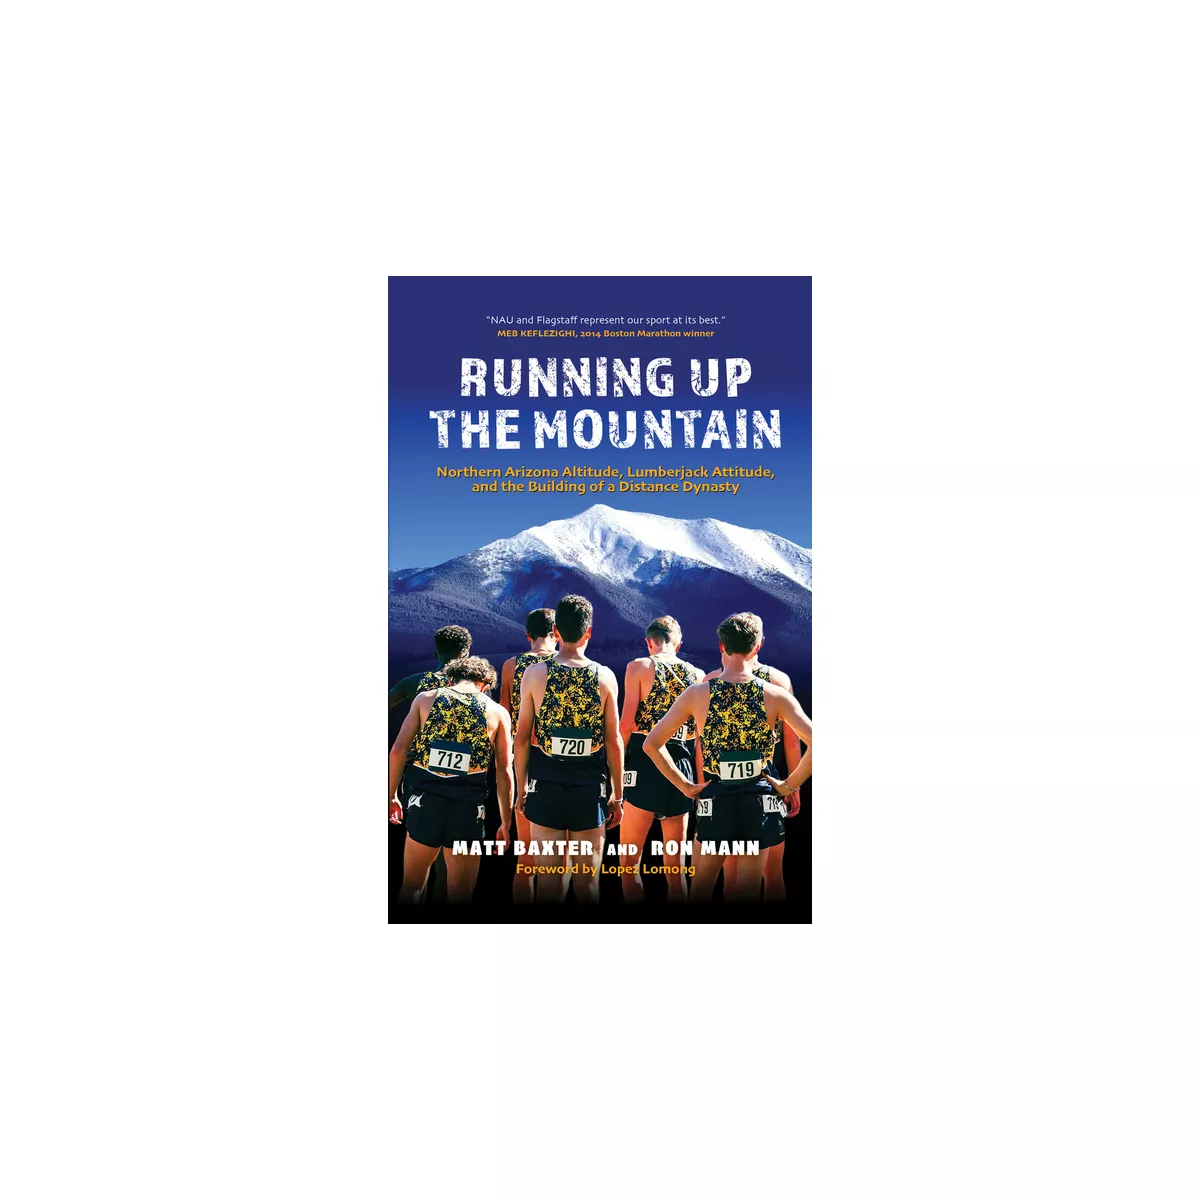 Book Review: “Running Up The Mountain”